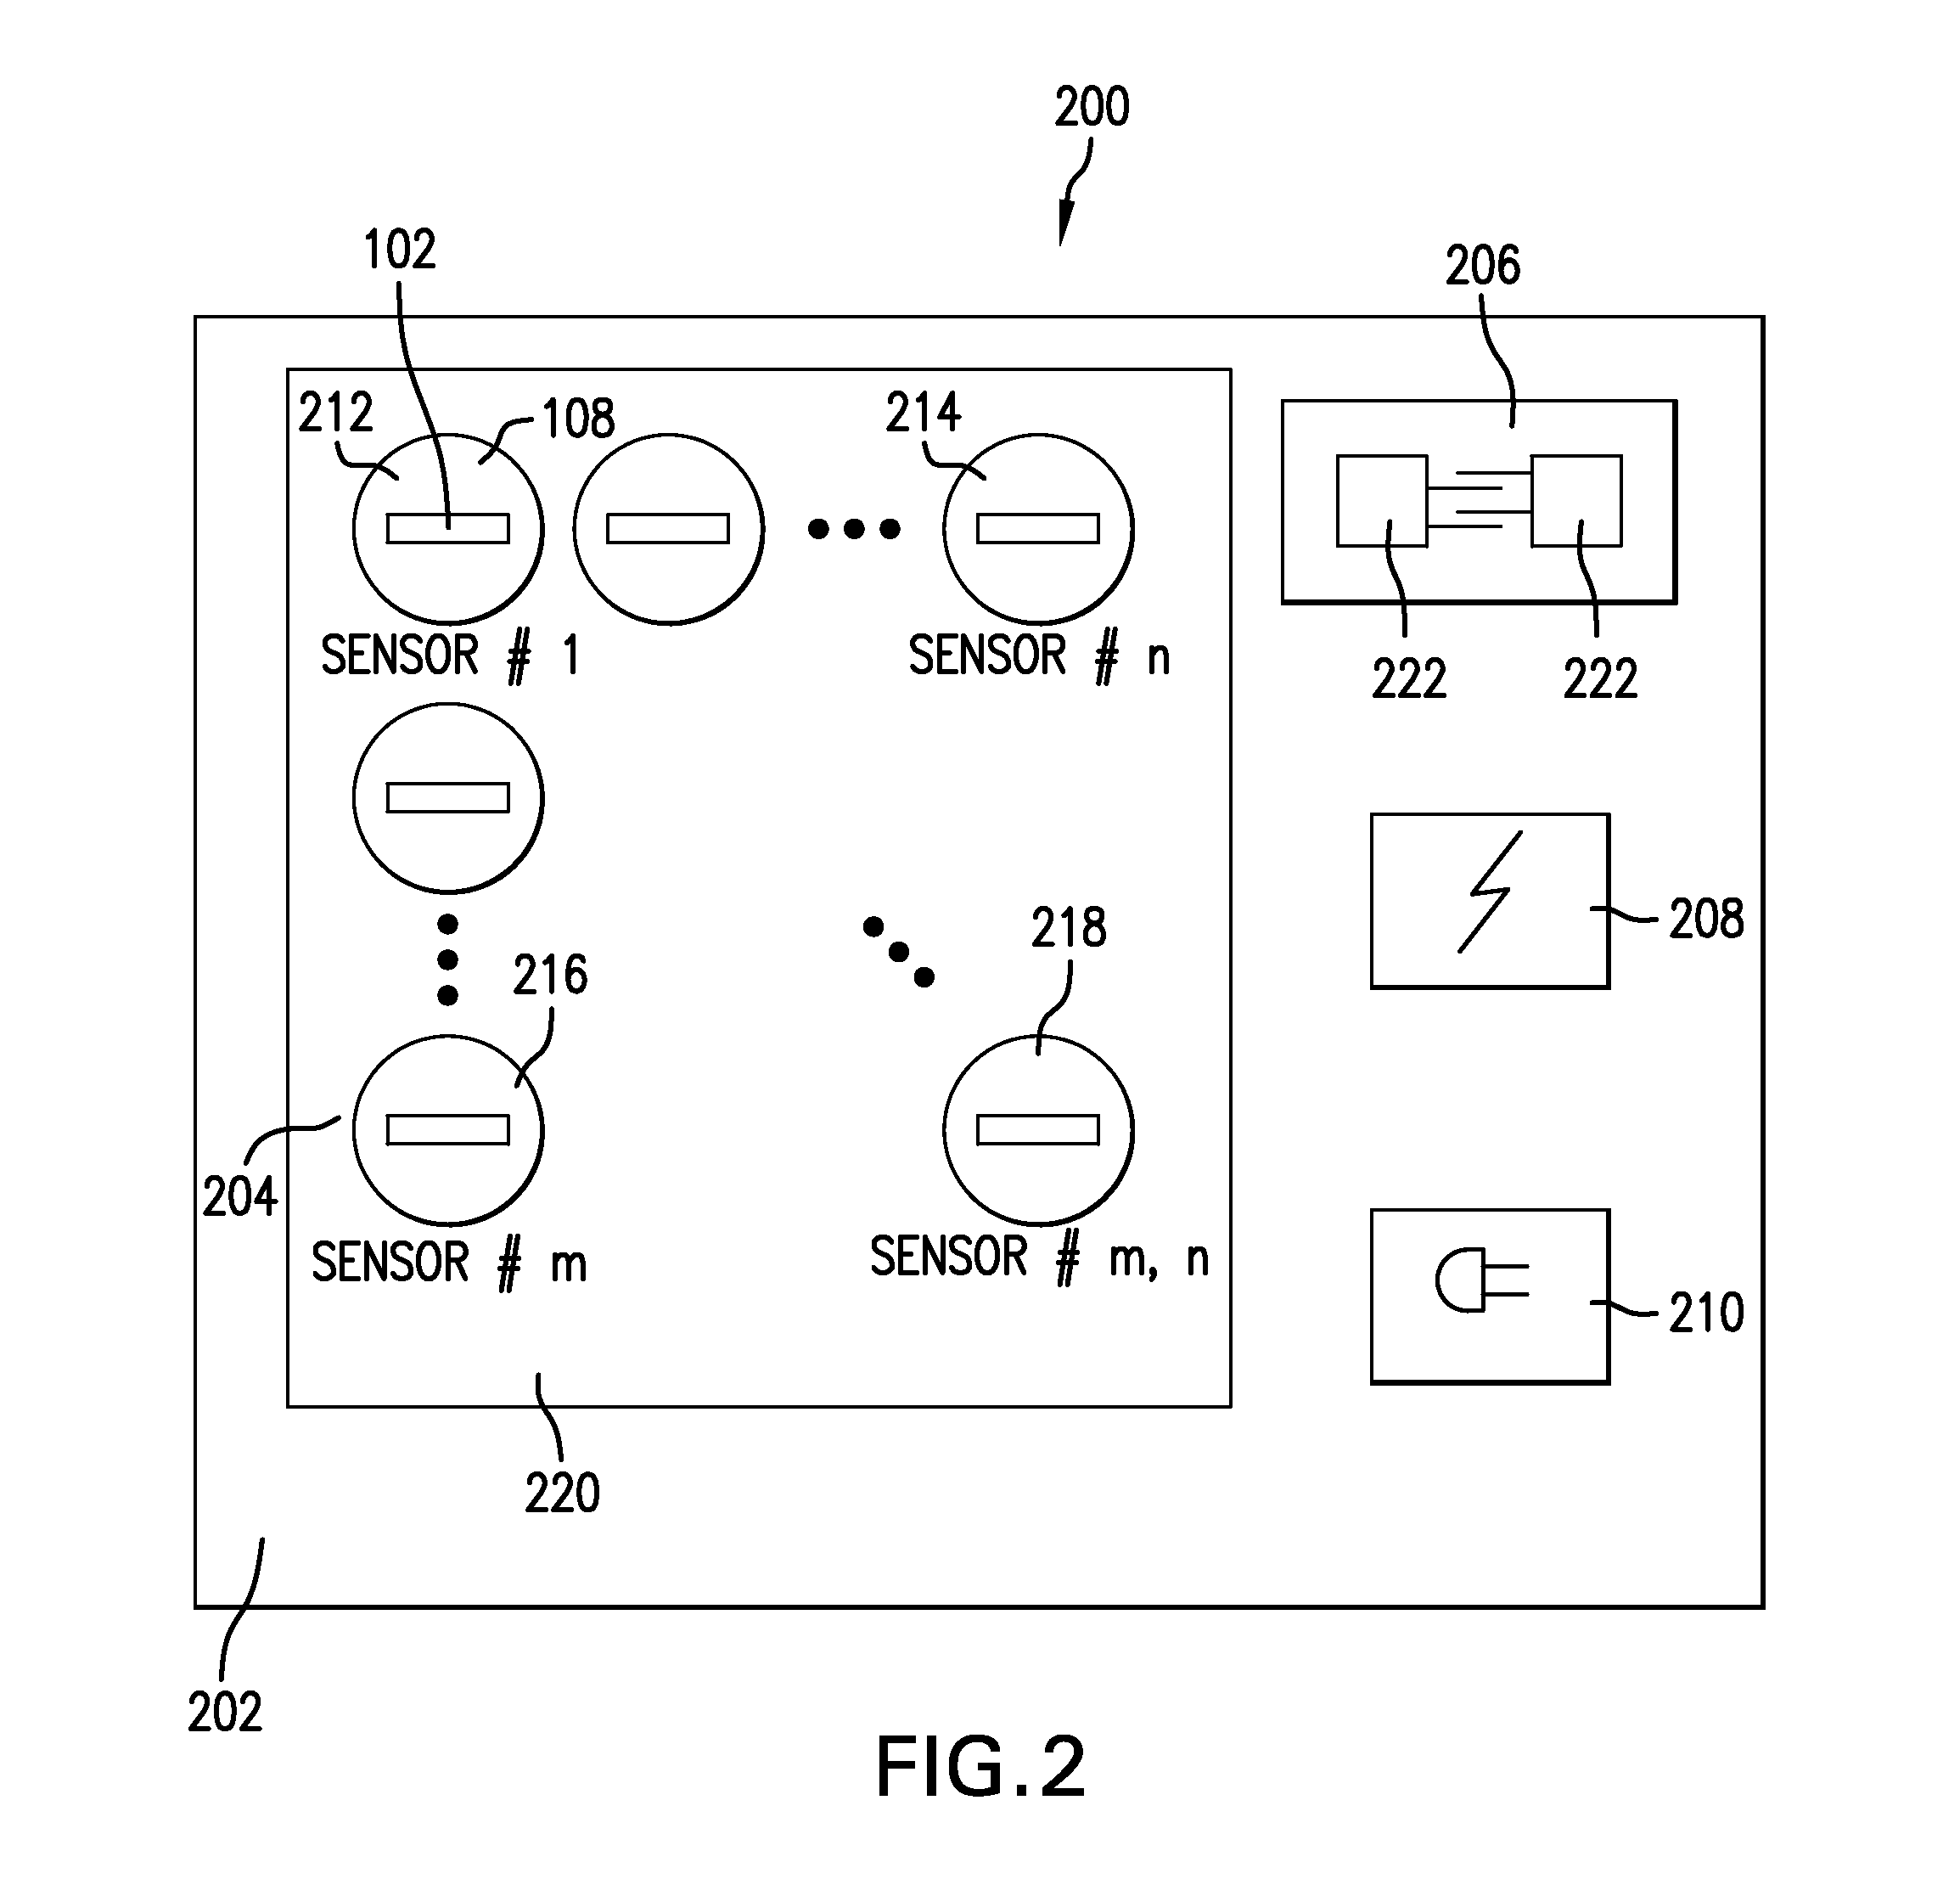 System and method for wireless, motion and position-sensing, integrating radiation sensor for occupational and environmental dosimetry